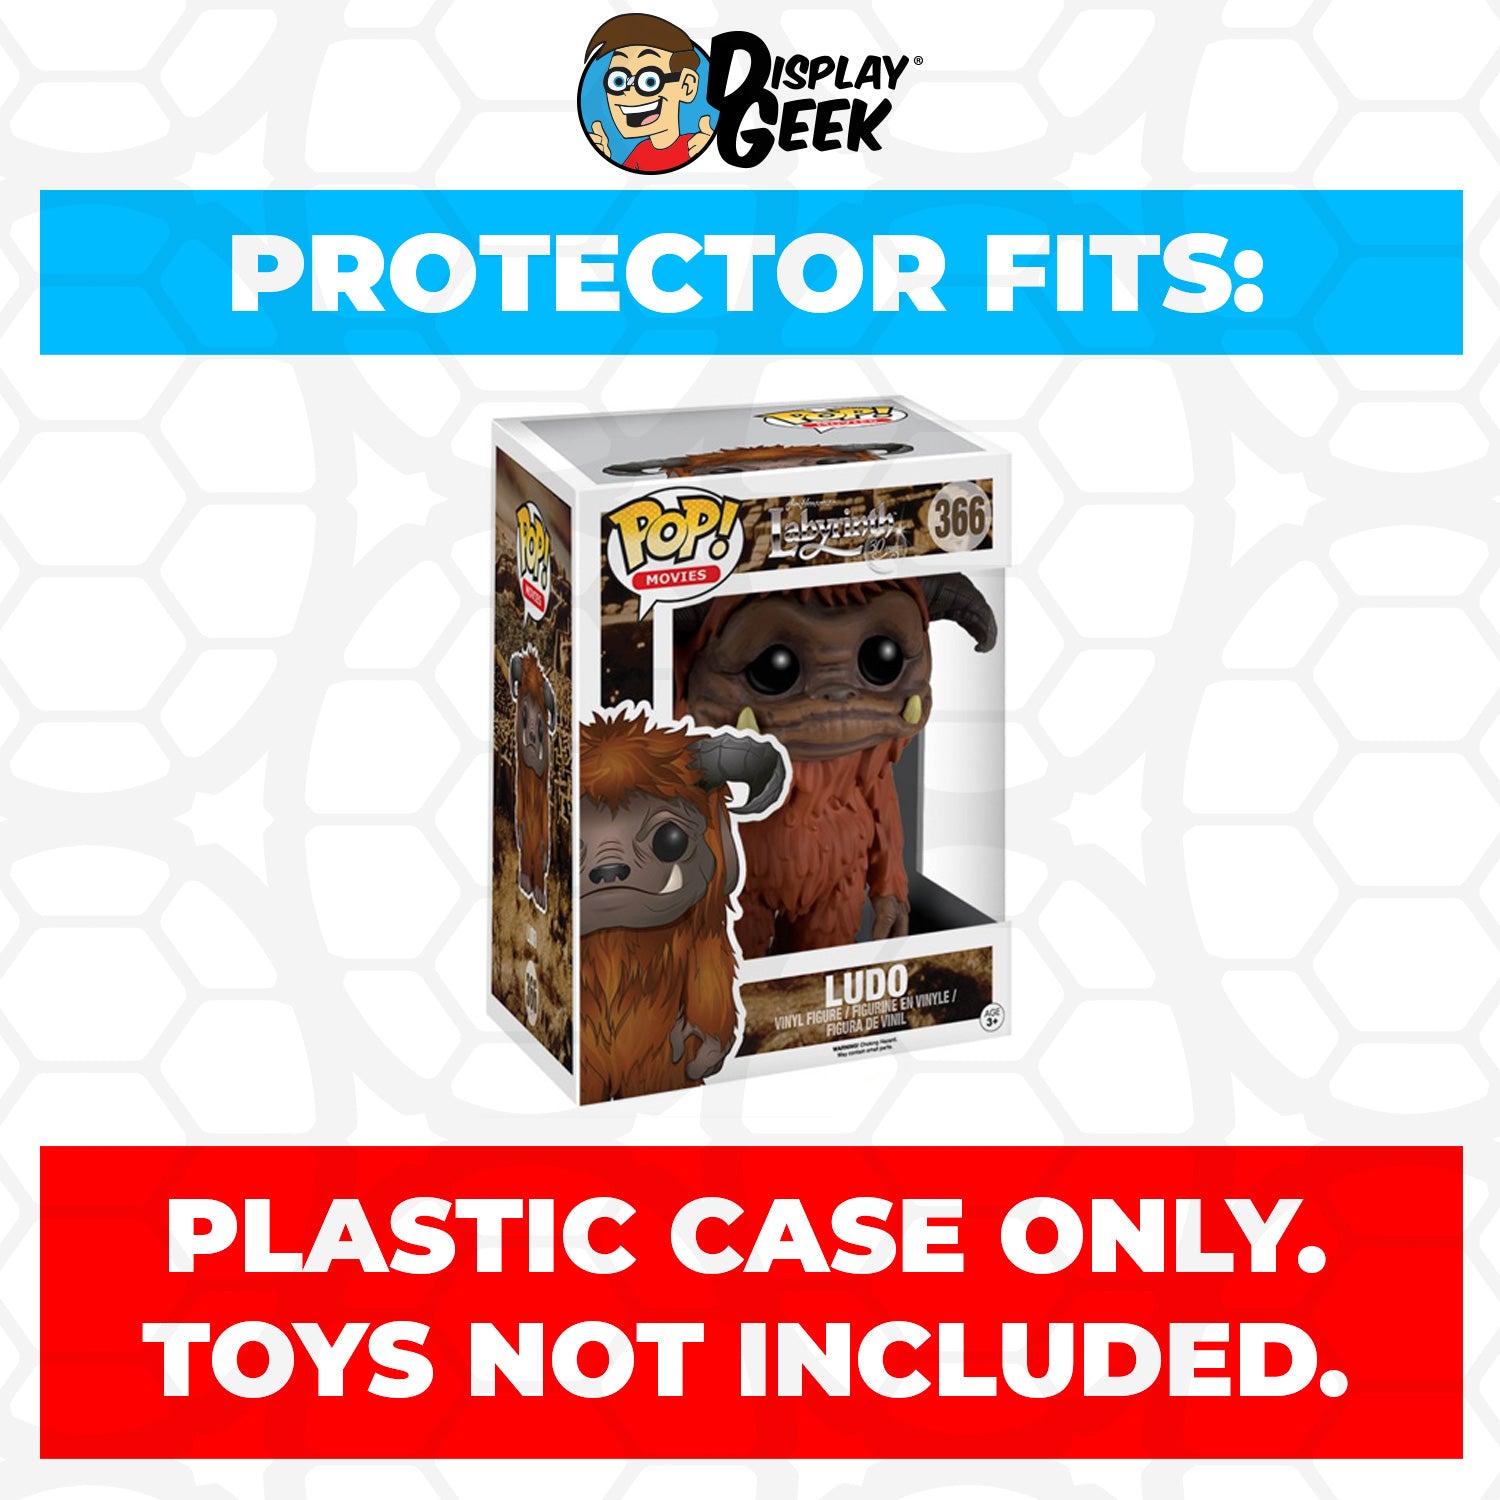 Pop Protector for 6 inch Ludo #366 Super Funko Pop - PPG Pop Protector Guide Search Created by Display Geek